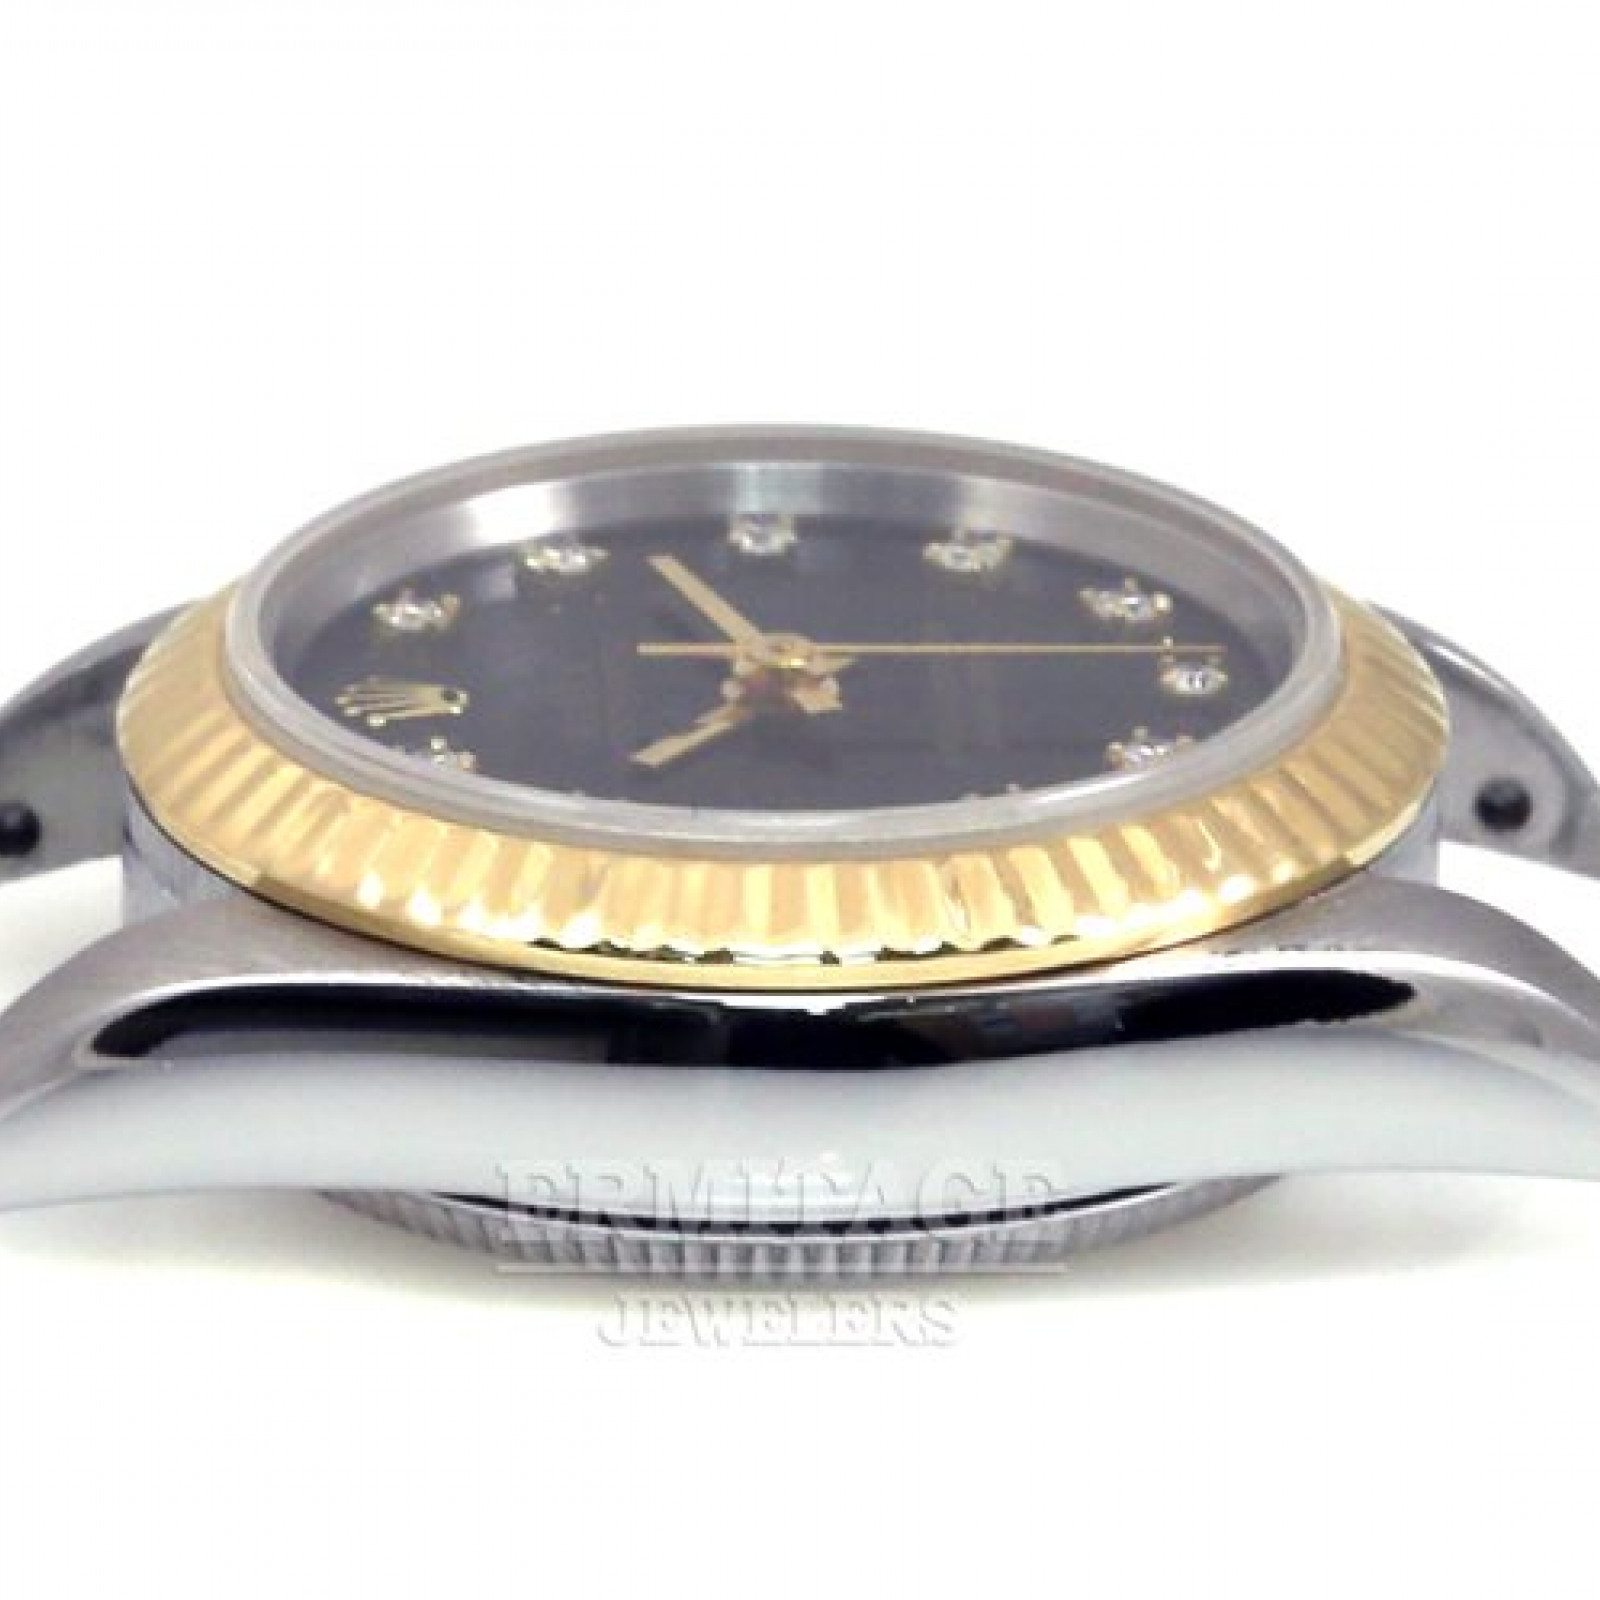 Black Diamond Dial Rolex Oyster Perpetual 67193